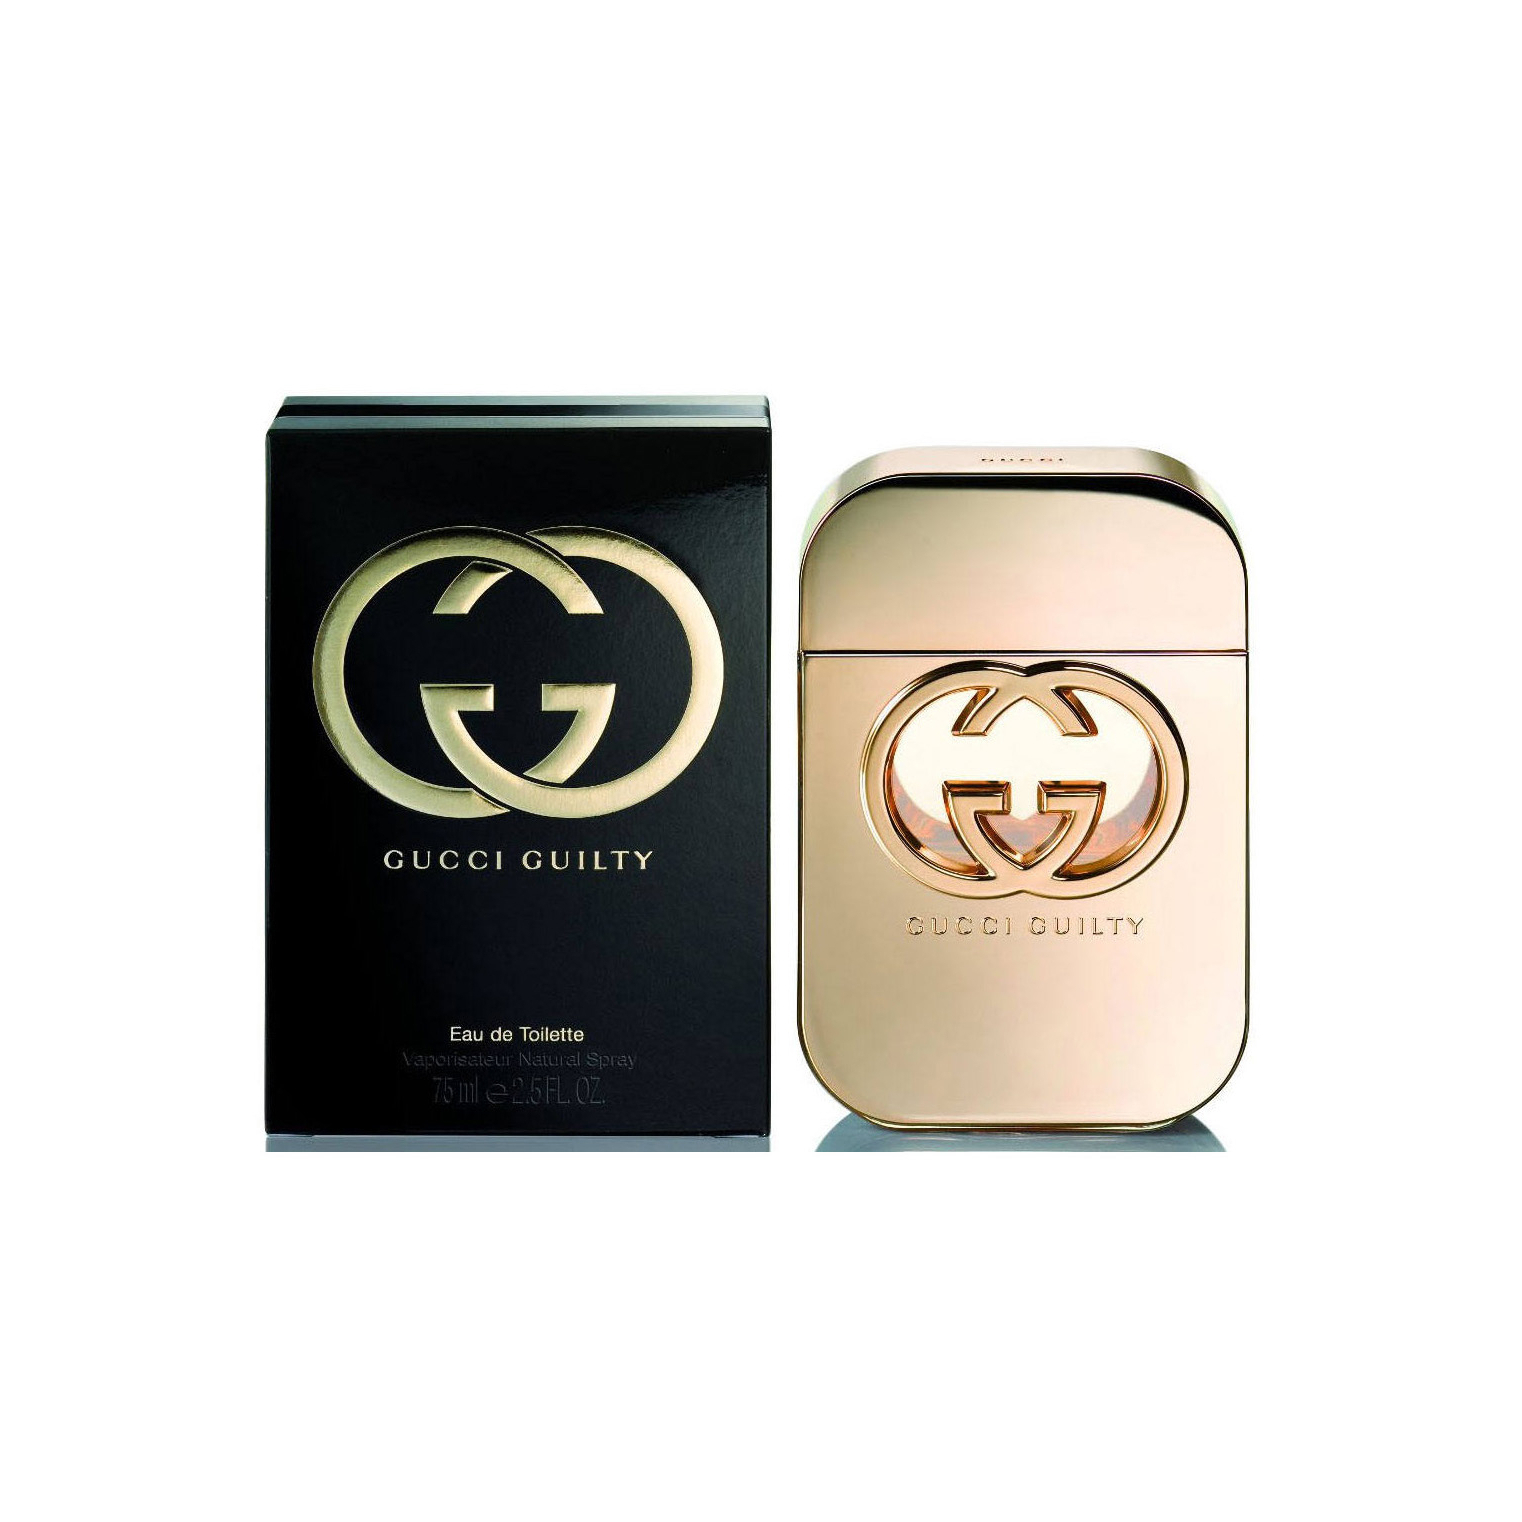 Gucci Guilty EDT Spray 2.5 Oz For Women